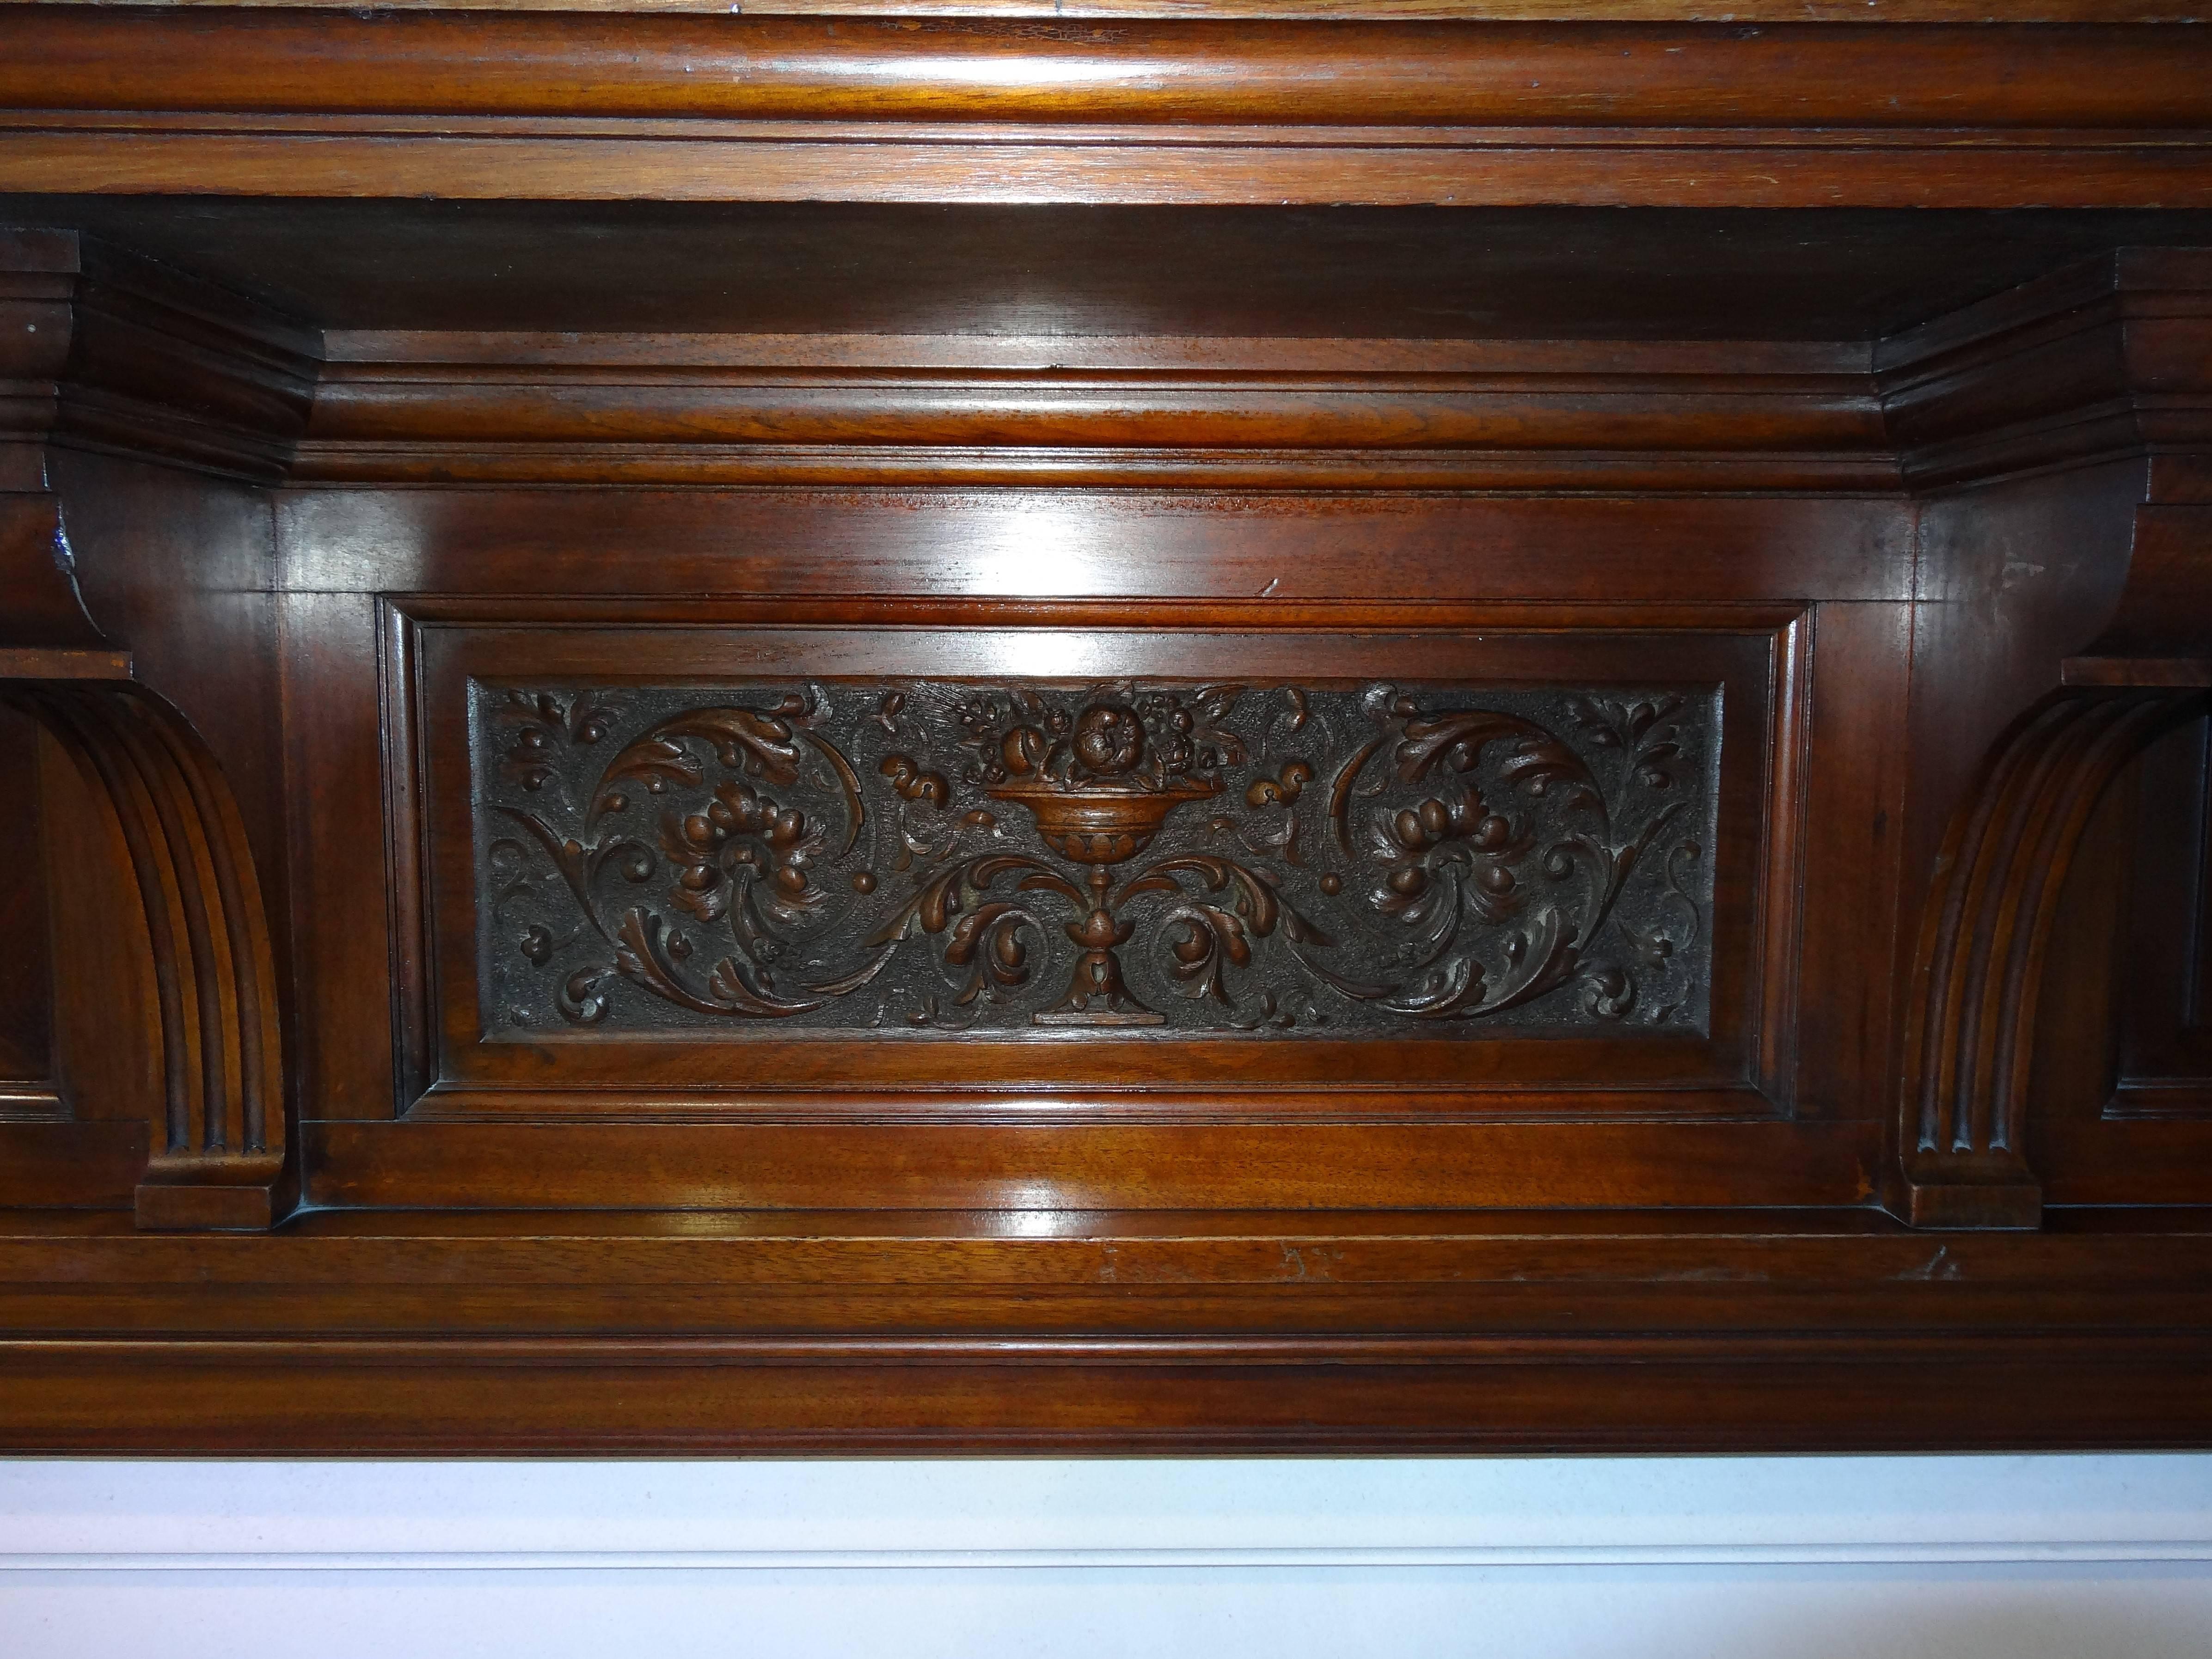 20th Century Edwardian Carved Walnut Fireplace Surround with Overmantel Mirror In Good Condition For Sale In Lurgan, Northern Ireland